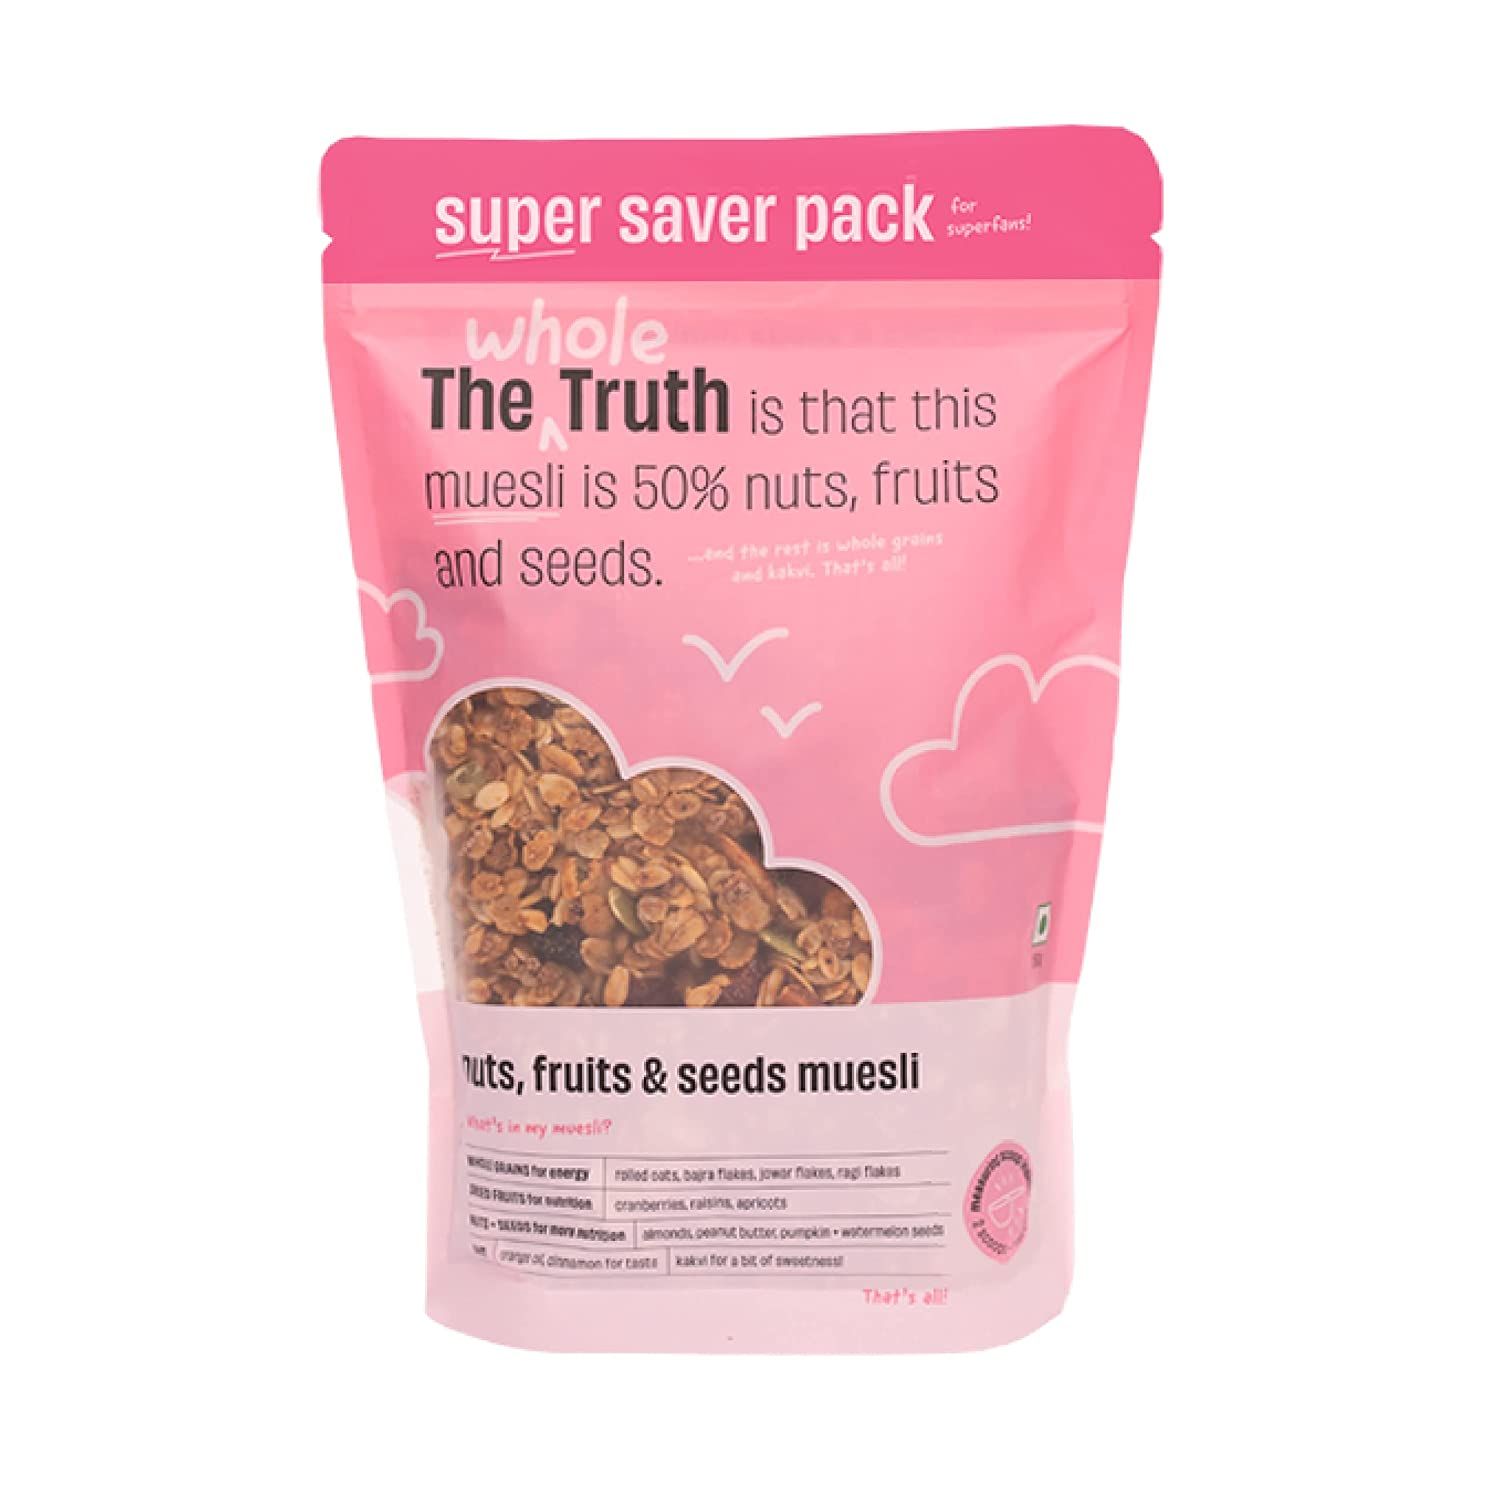 The Whole Truth - Breakfast Muesli - Nuts, Fruits And Seeds Image